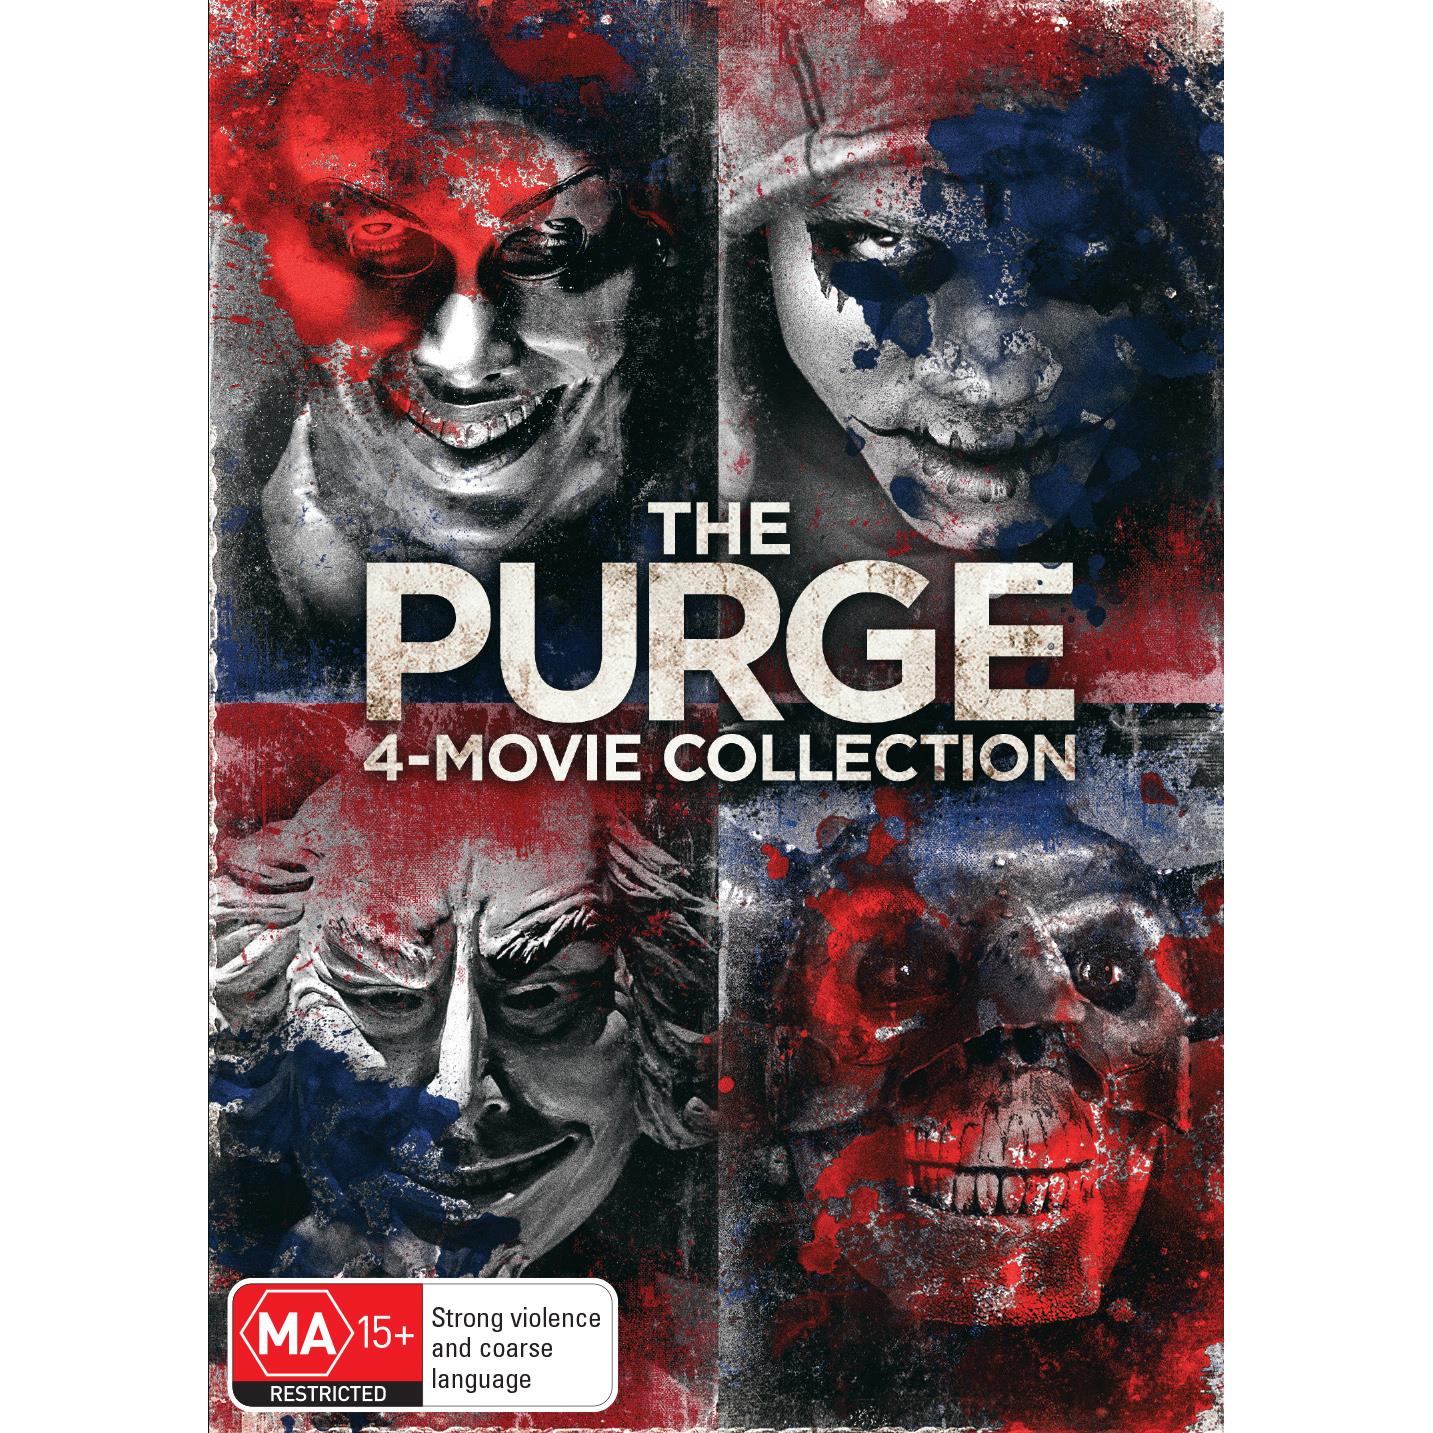 Https Www Jbhifi Com Au Products First Purge The 2018 Dvd 2020 10 28t18 45 05 11 00 Daily Https Cdn Shopify Com S Files 1 0024 9803 5810 Products 335828 Product 0 I 6d257b7b 8b14 4507 920a D2122fcfe048 Jpg V 1572321569 First Purge The - roblox adventures be a god or an evil demon in roblox angels vs demons simulator